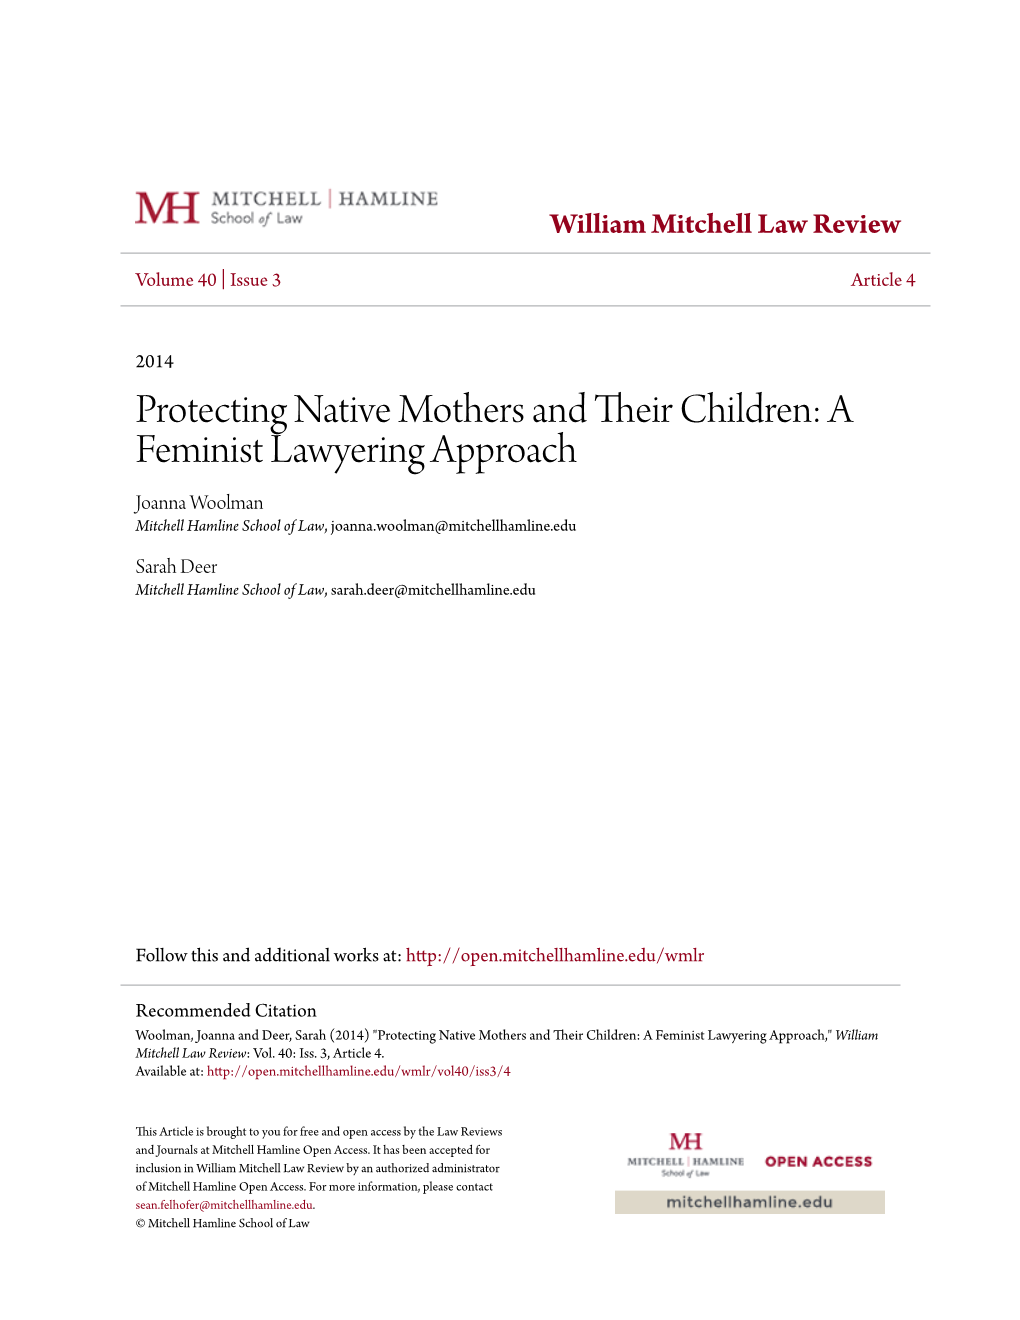 Protecting Native Mothers and Their Children: a Feminist Lawyerin